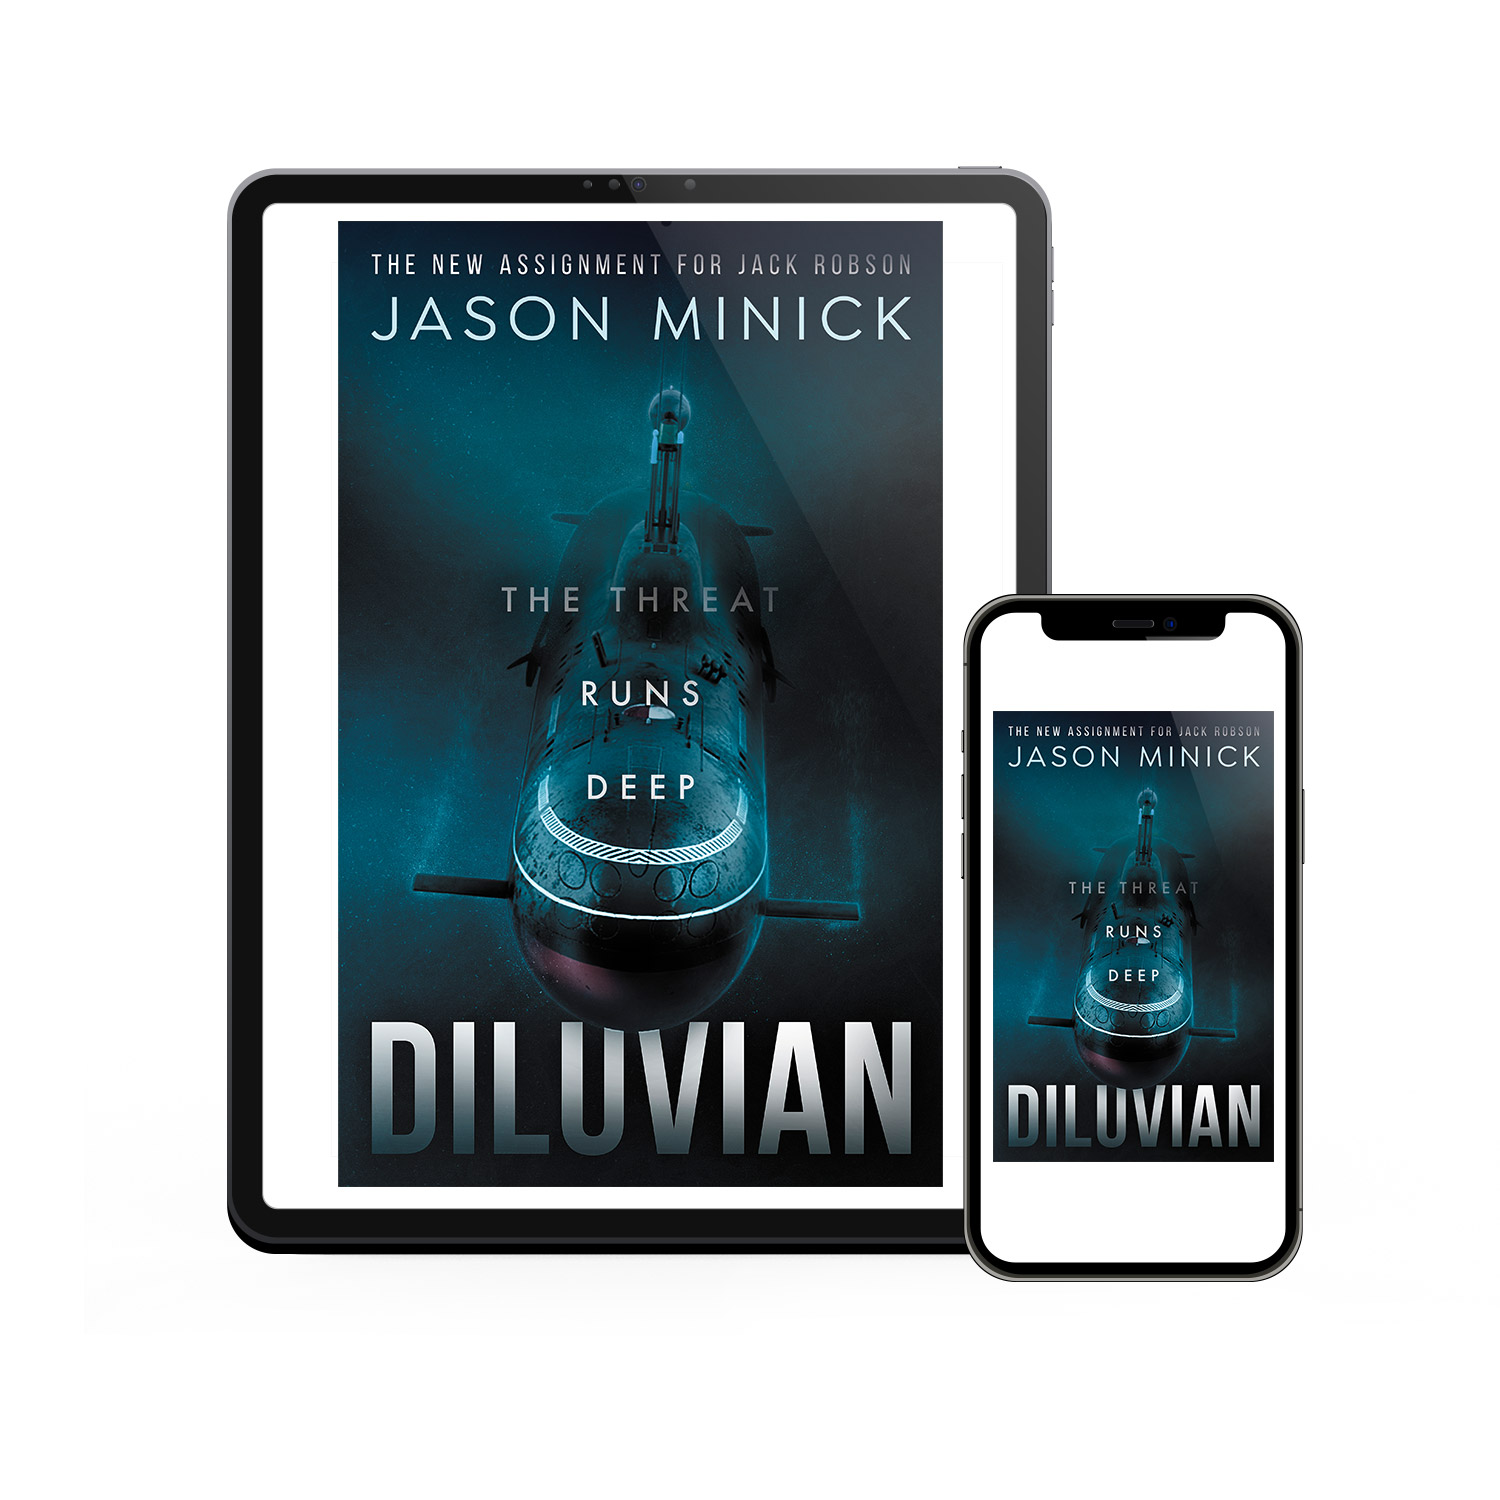 'DILUVIAN' is a secretive thriller on an epic scale, by Jason Minick. The book cover and interior were designed by Mark Thomas, of coverness.com. To find out more about my book design services, please visit www.coverness.com.